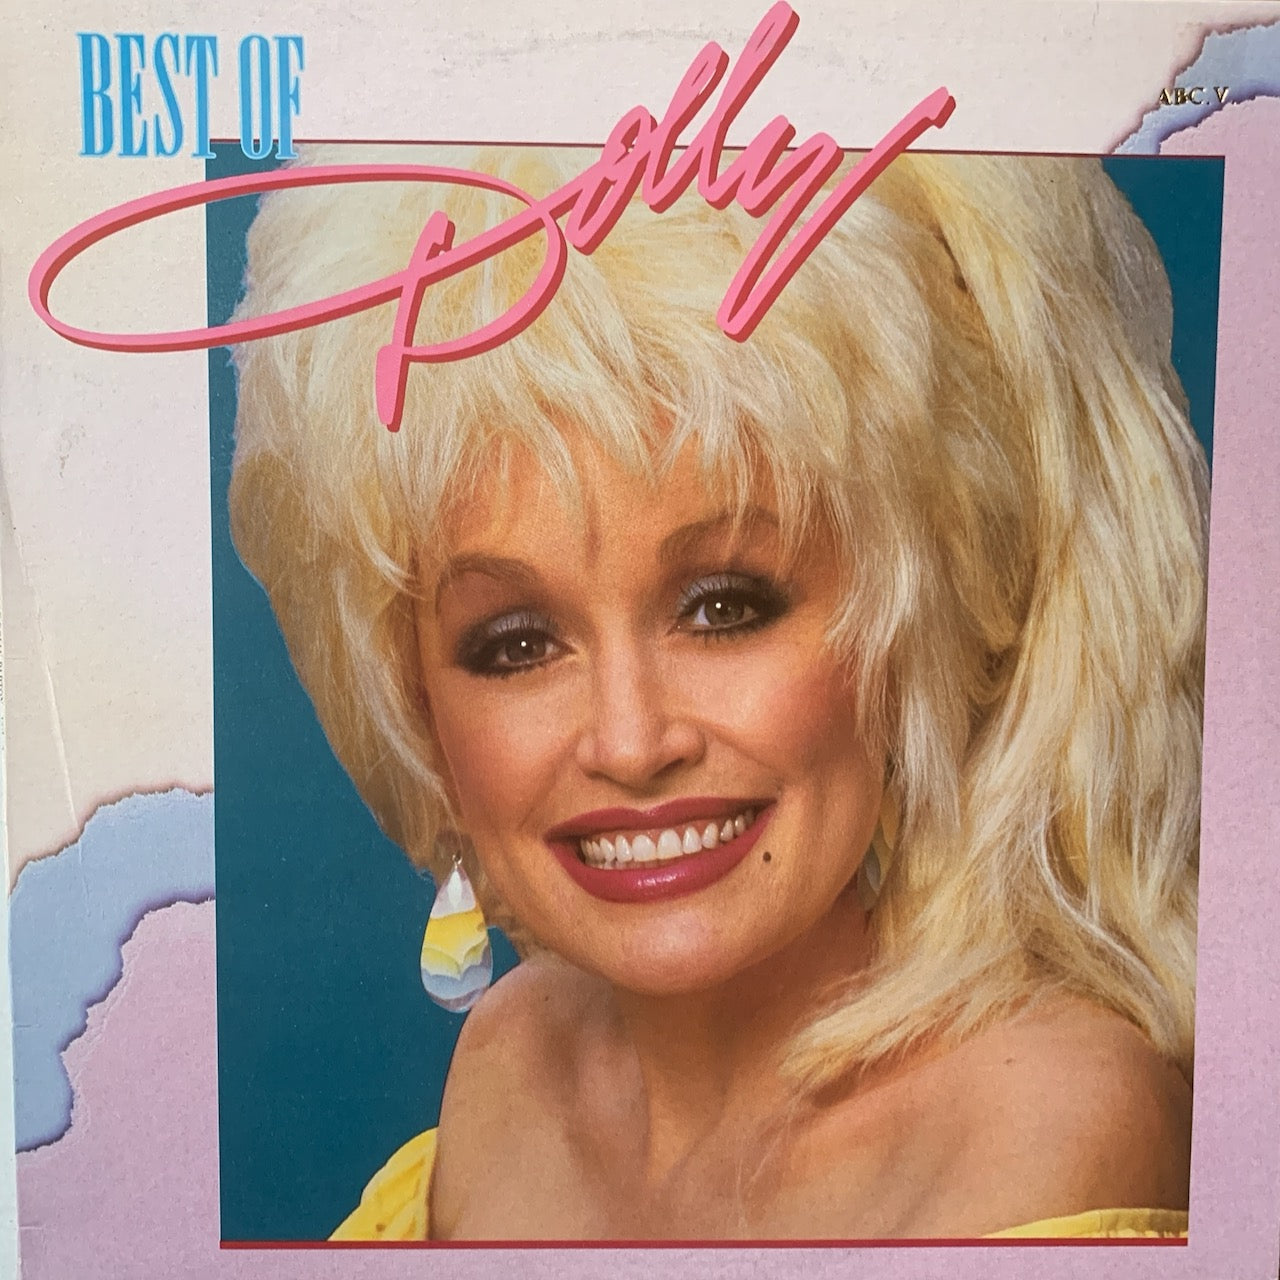 DOLLY PARTON - BEST OF DOLLY PARTON    VG+/VG+ 1975